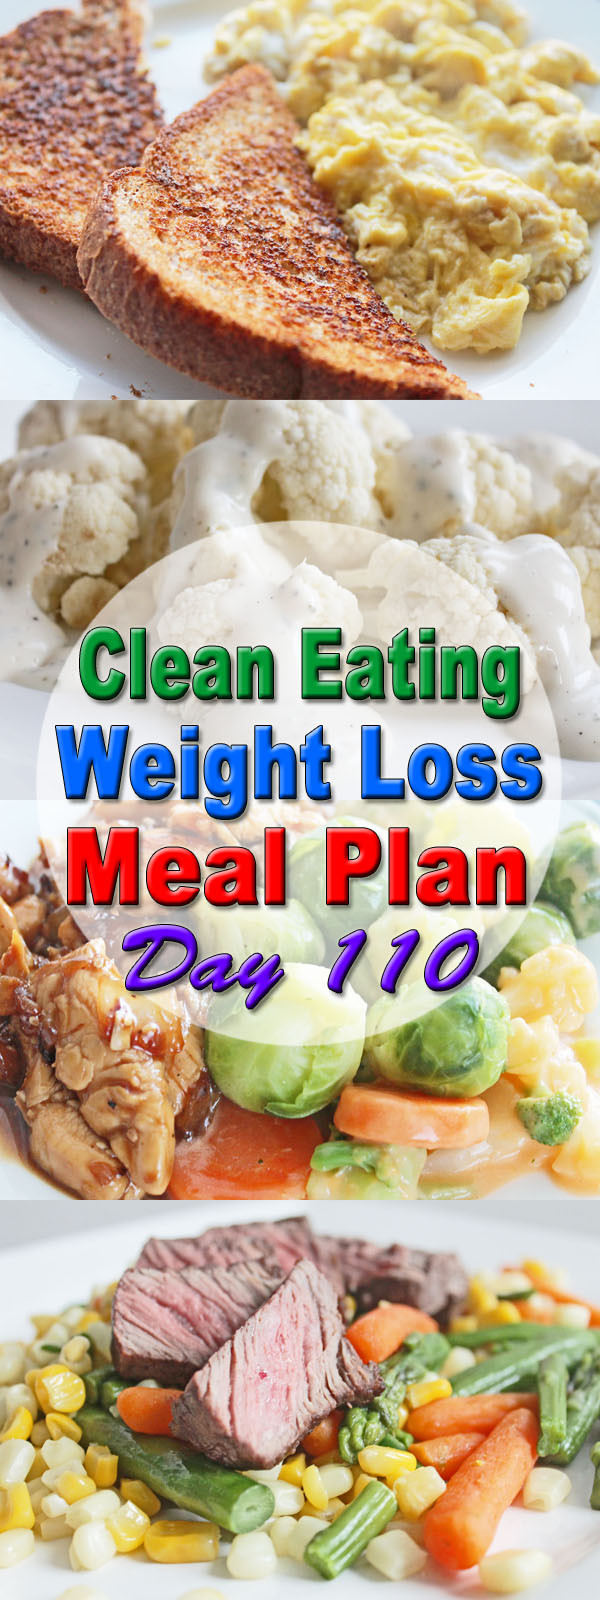 Clean Eating Weight Loss Meal Plans
 Clean Eating Weight Loss Meal Plan 110